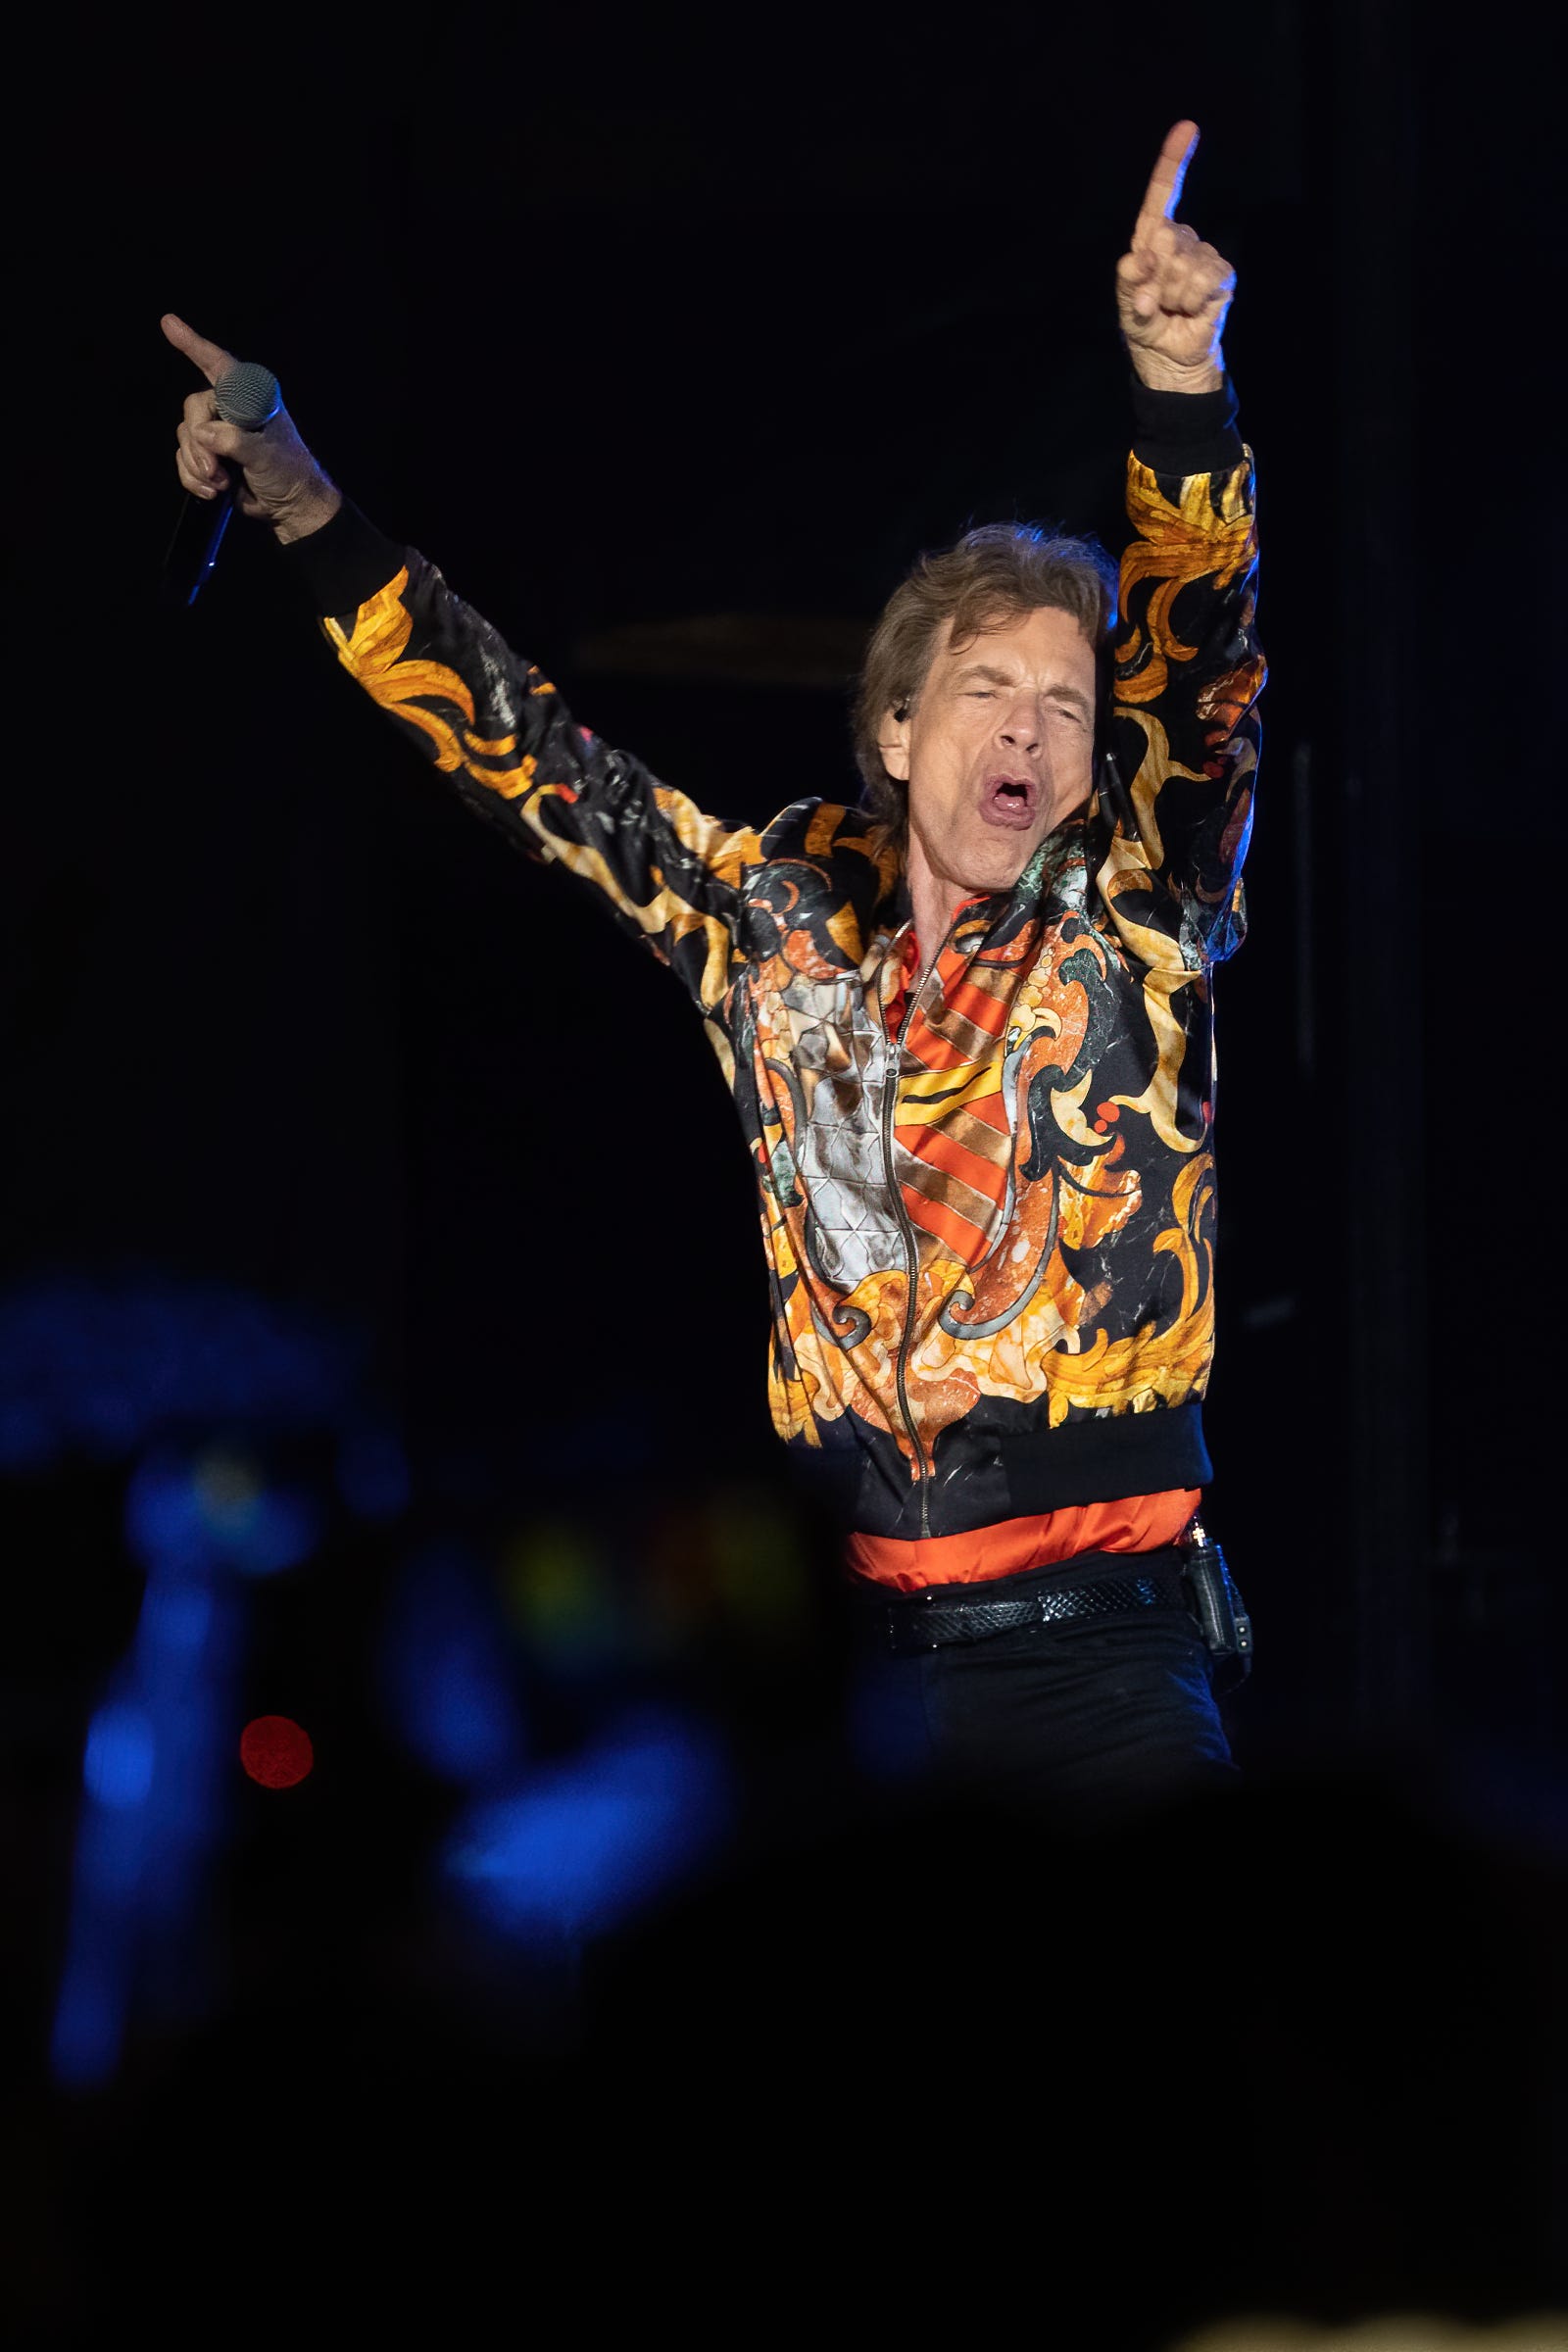 Mick Jagger of the Rolling Stones performs at Circuit of the Americas on Nov. 20, 2021, in Austin, Texas.